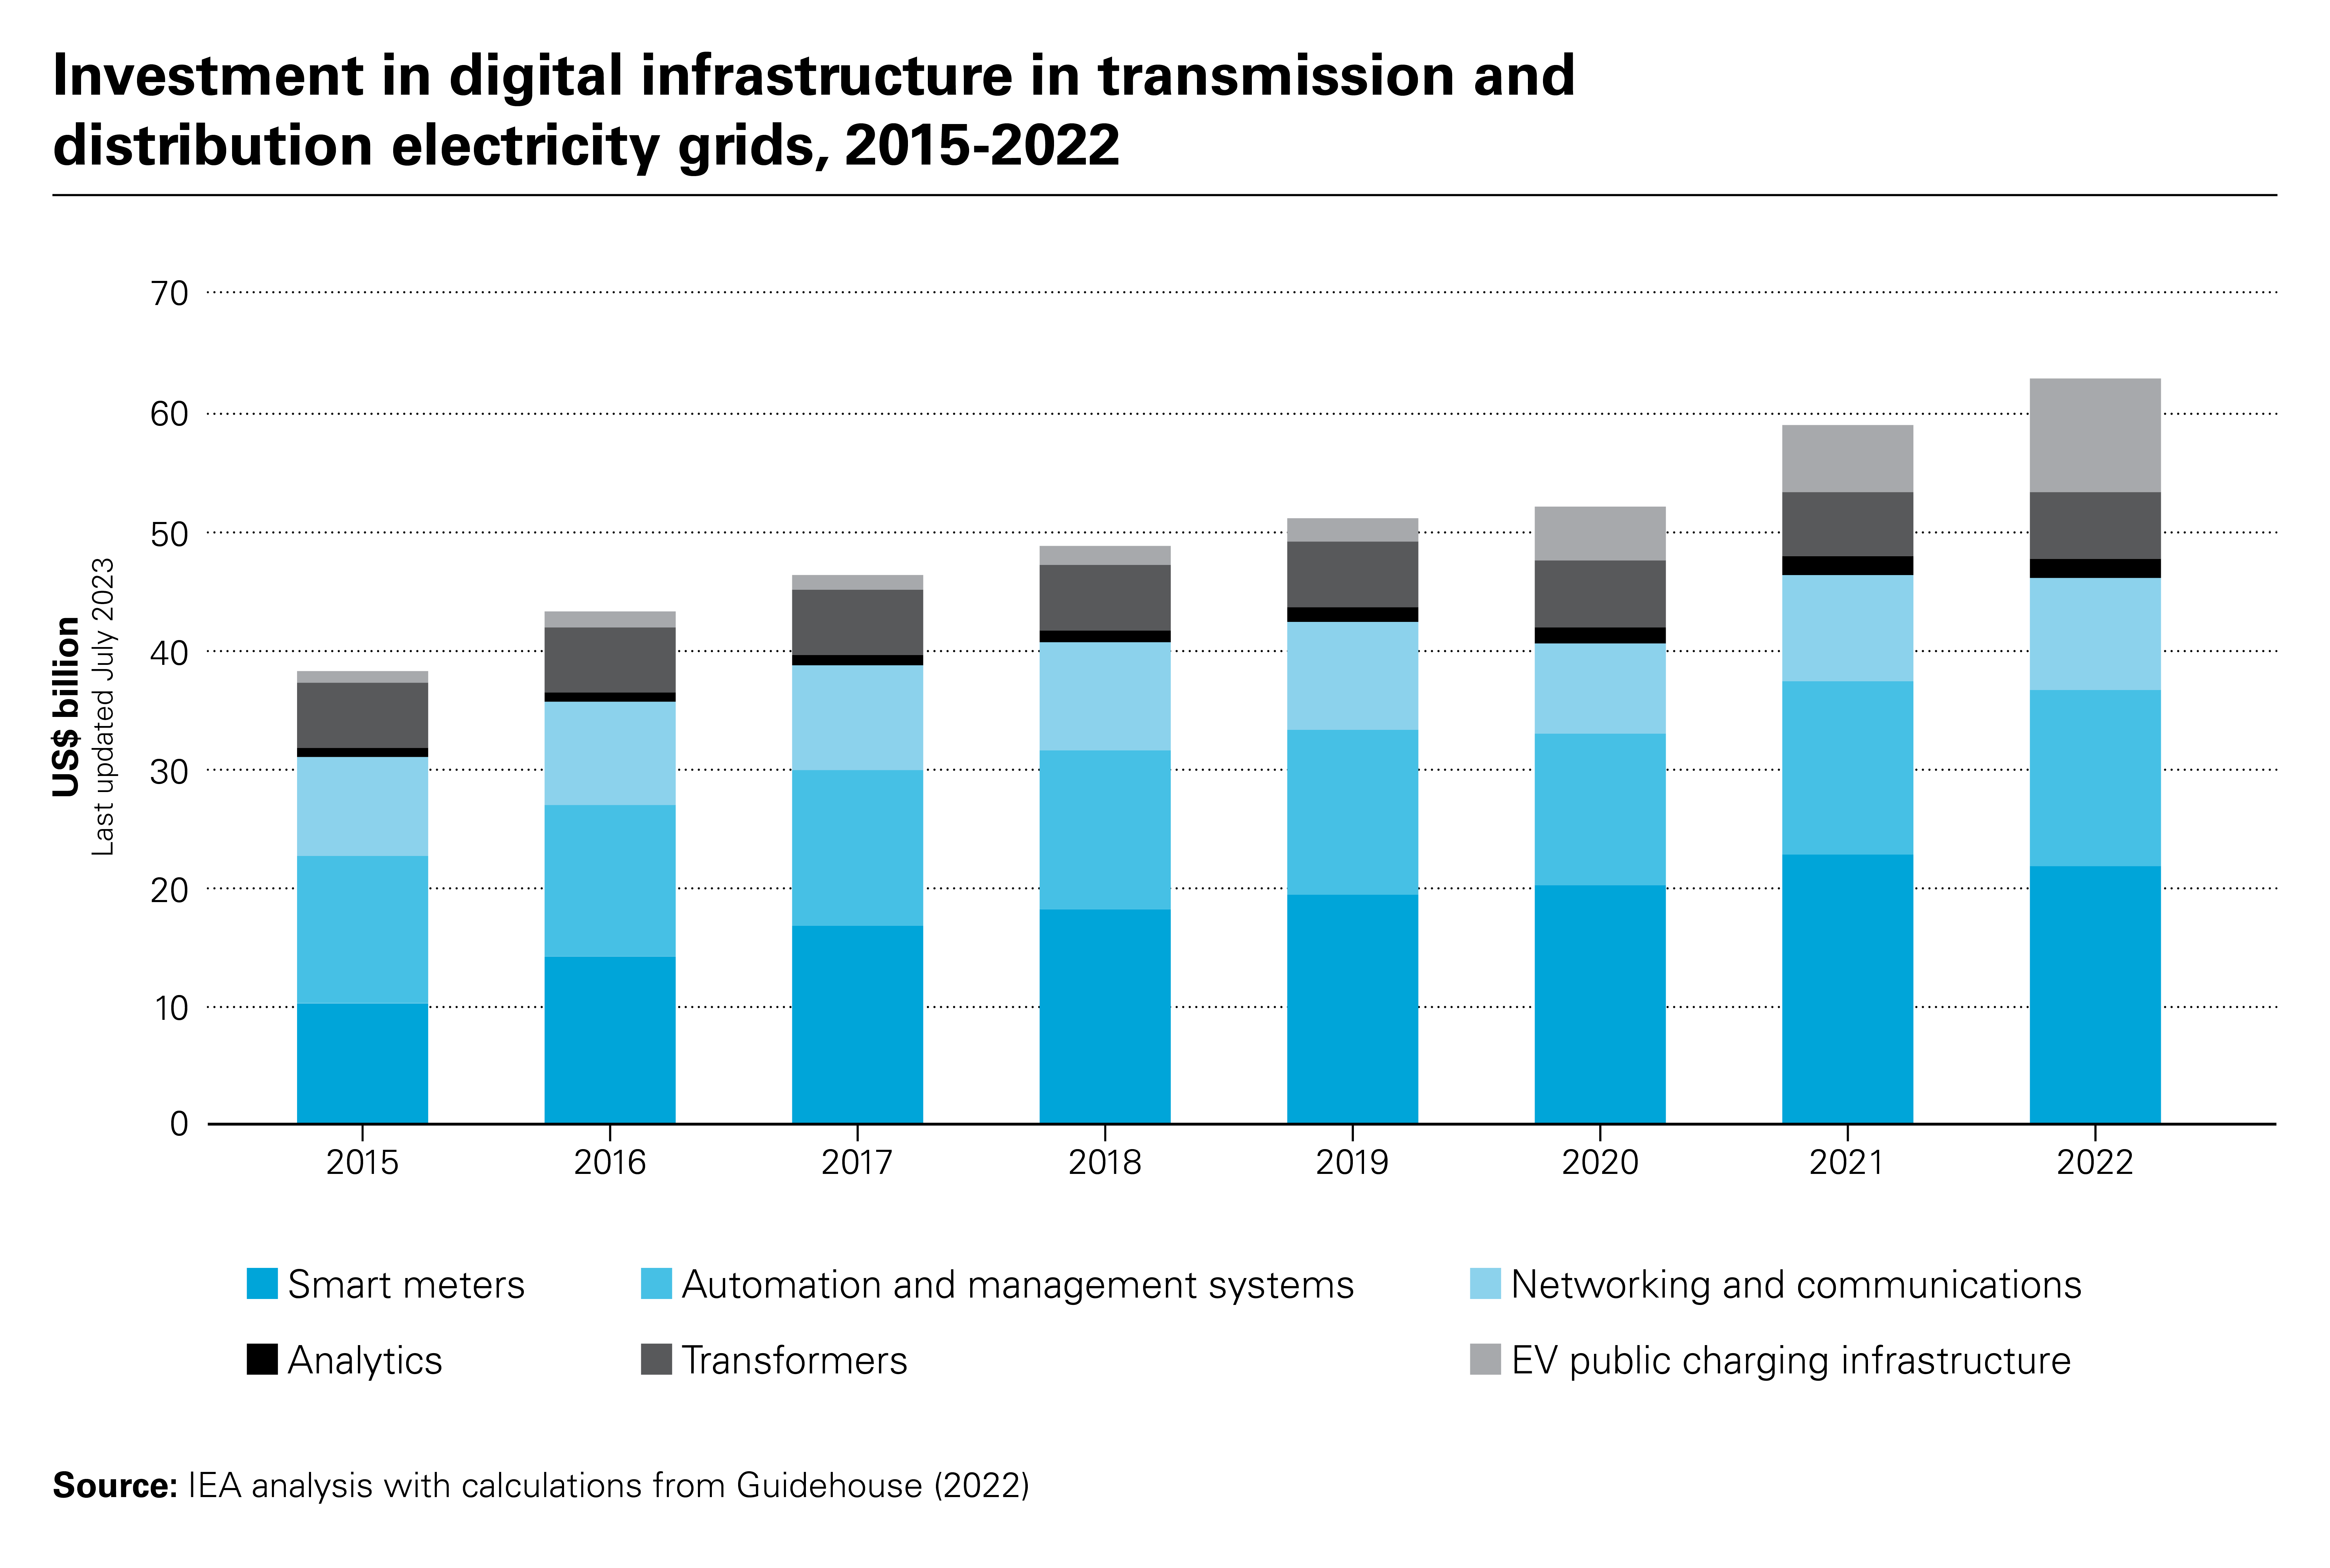 Investment in digital infrastructure in transmission and distribution electricity grids, 2015-2022